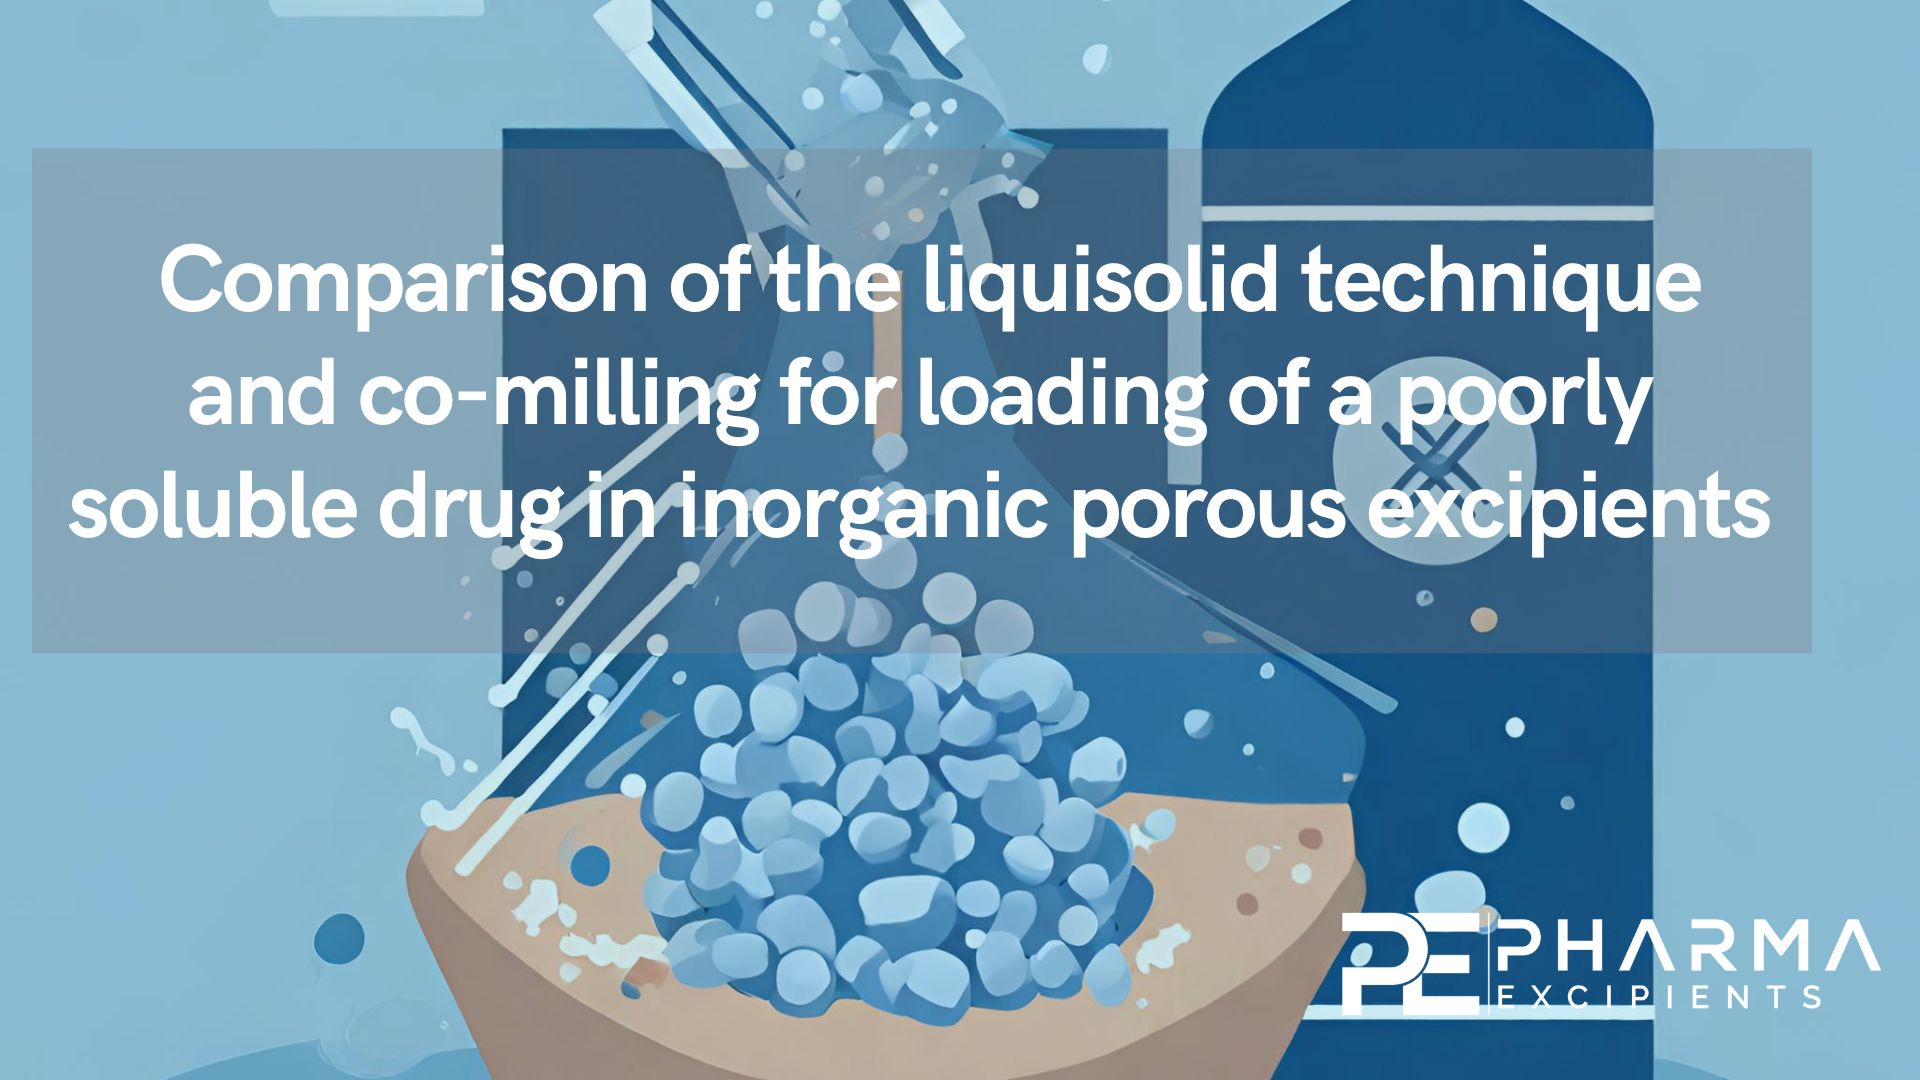 Comparison of the liquisolid technique and co-milling for loading of a poorly soluble drug in inorganic porous excipients